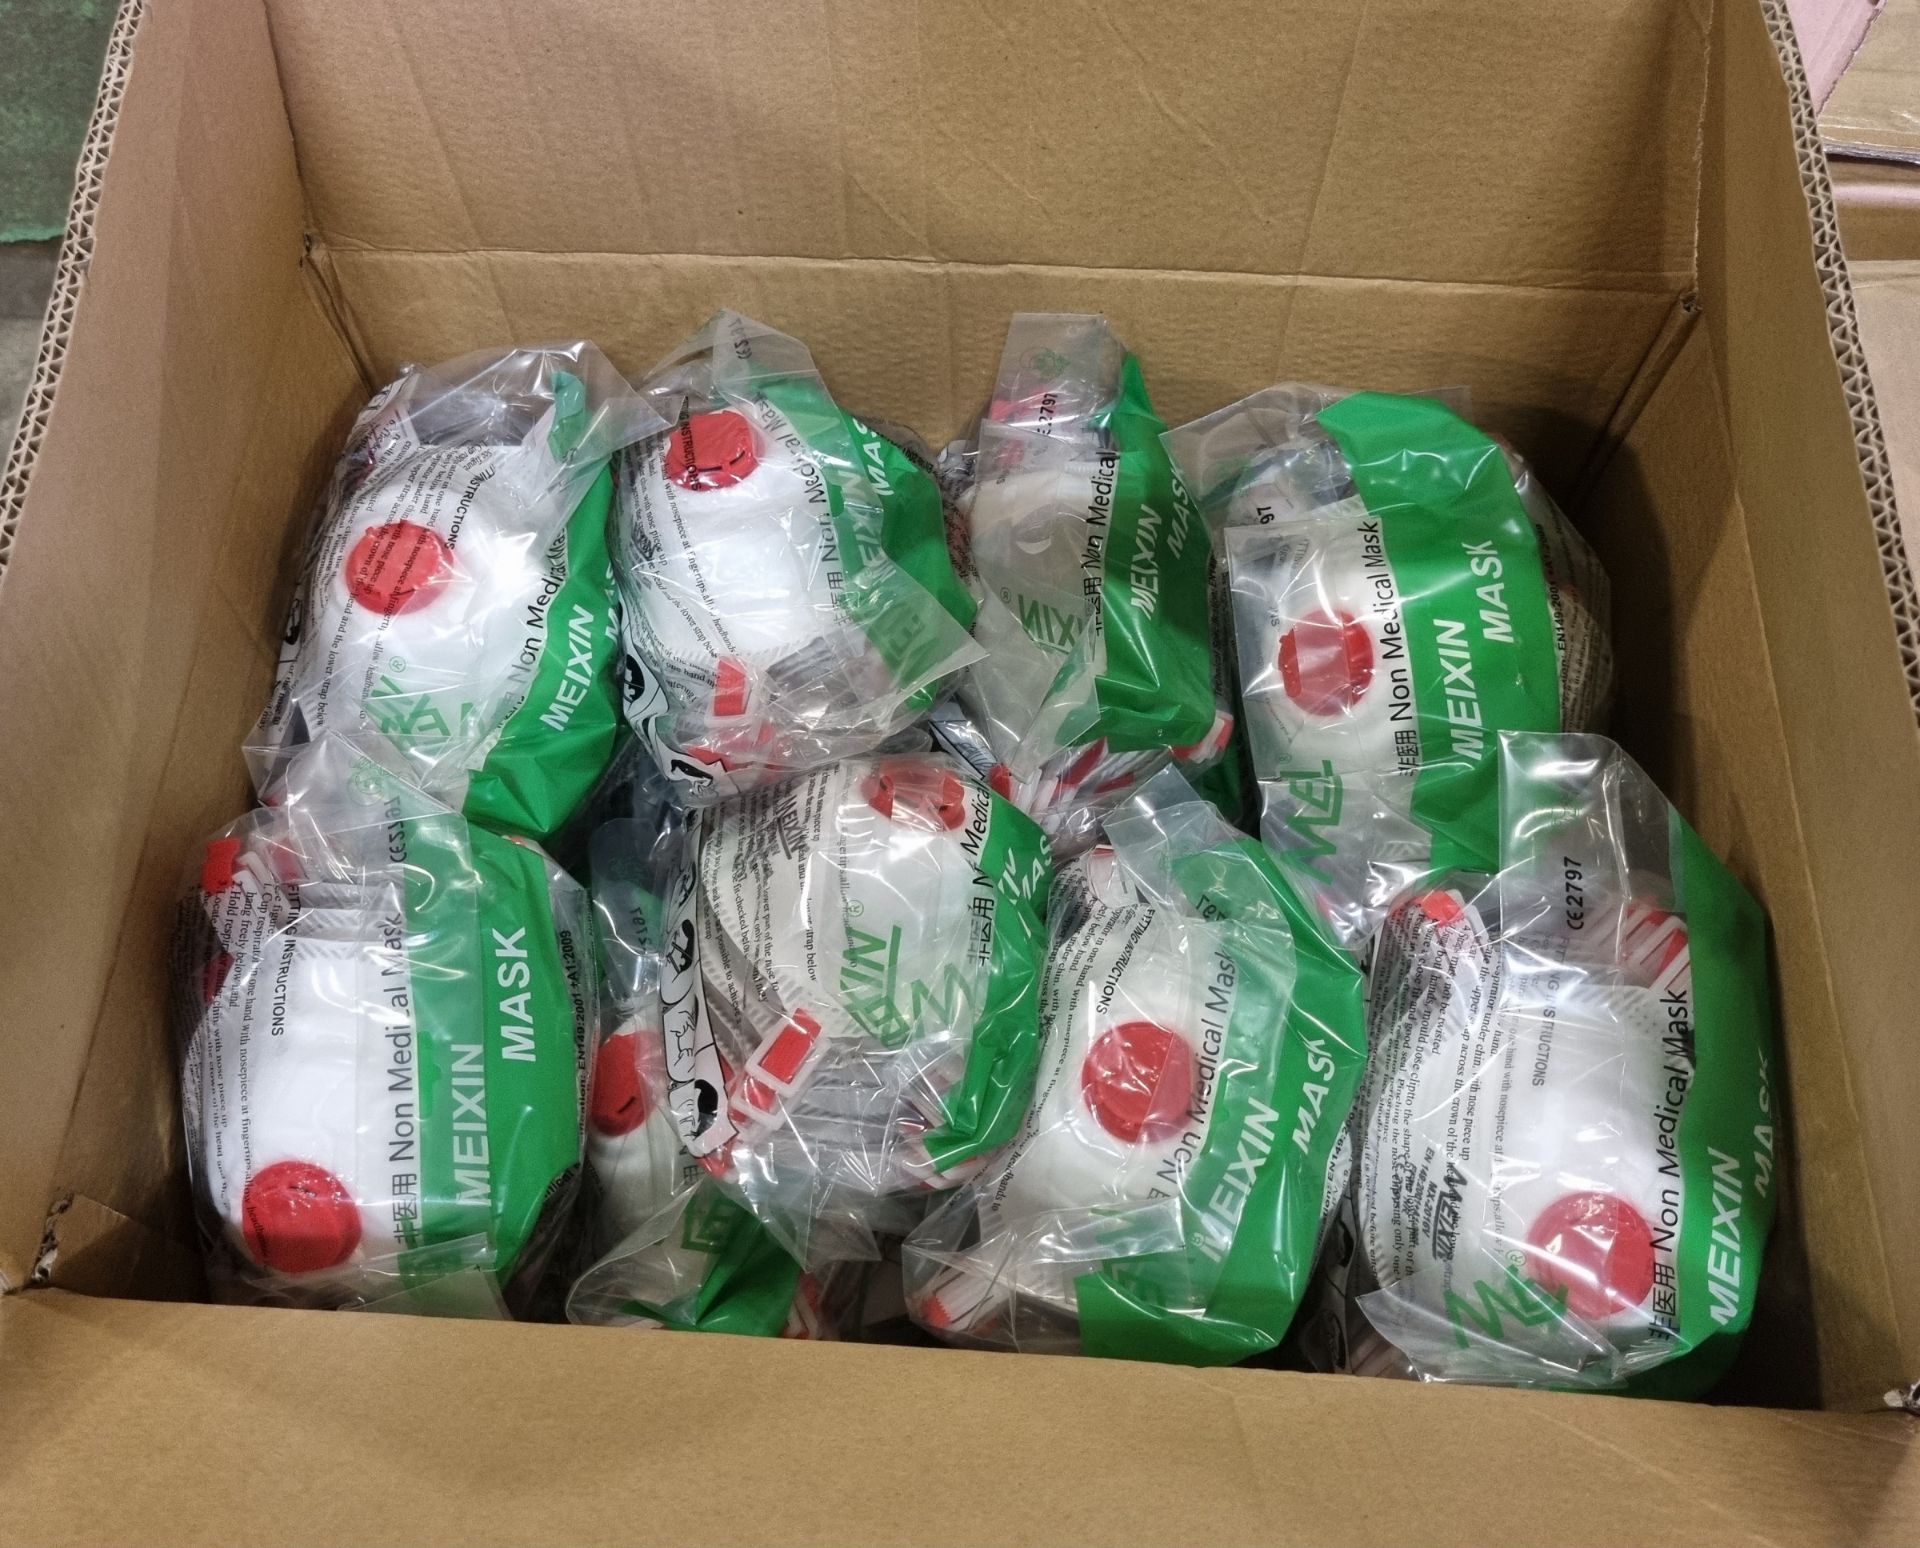 10x boxes of Meixin MX-2016V FFP3 dust mask/respirators - 200 units per box - OUT OF DATE - Image 3 of 4